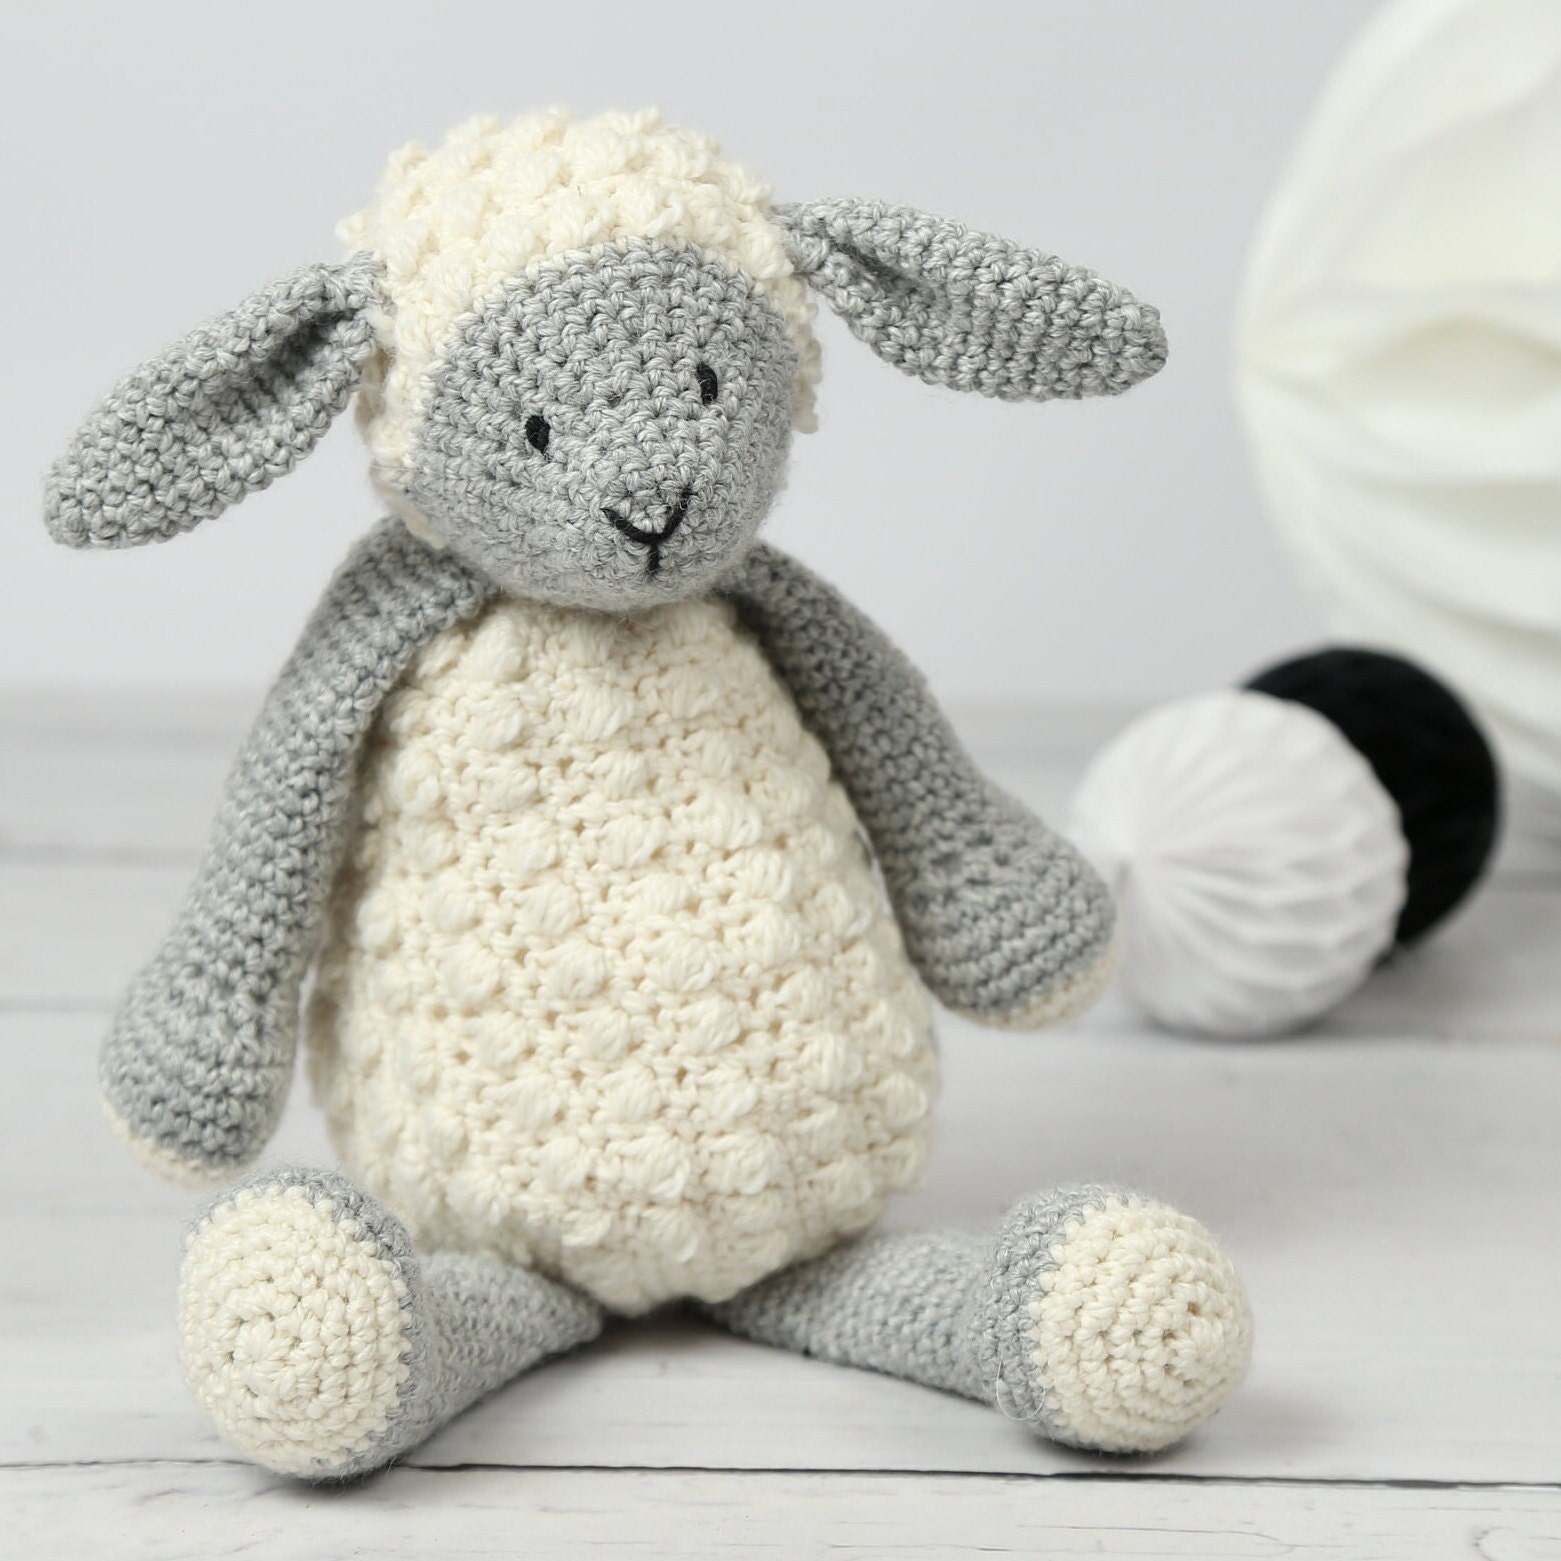 Mable Bunny Crochet Kit. Giant Oversized Amigurumi Bunny. Crochet Pattern. Animal  Crochet Kit. Easy Crochet Pattern by Wool Couture 